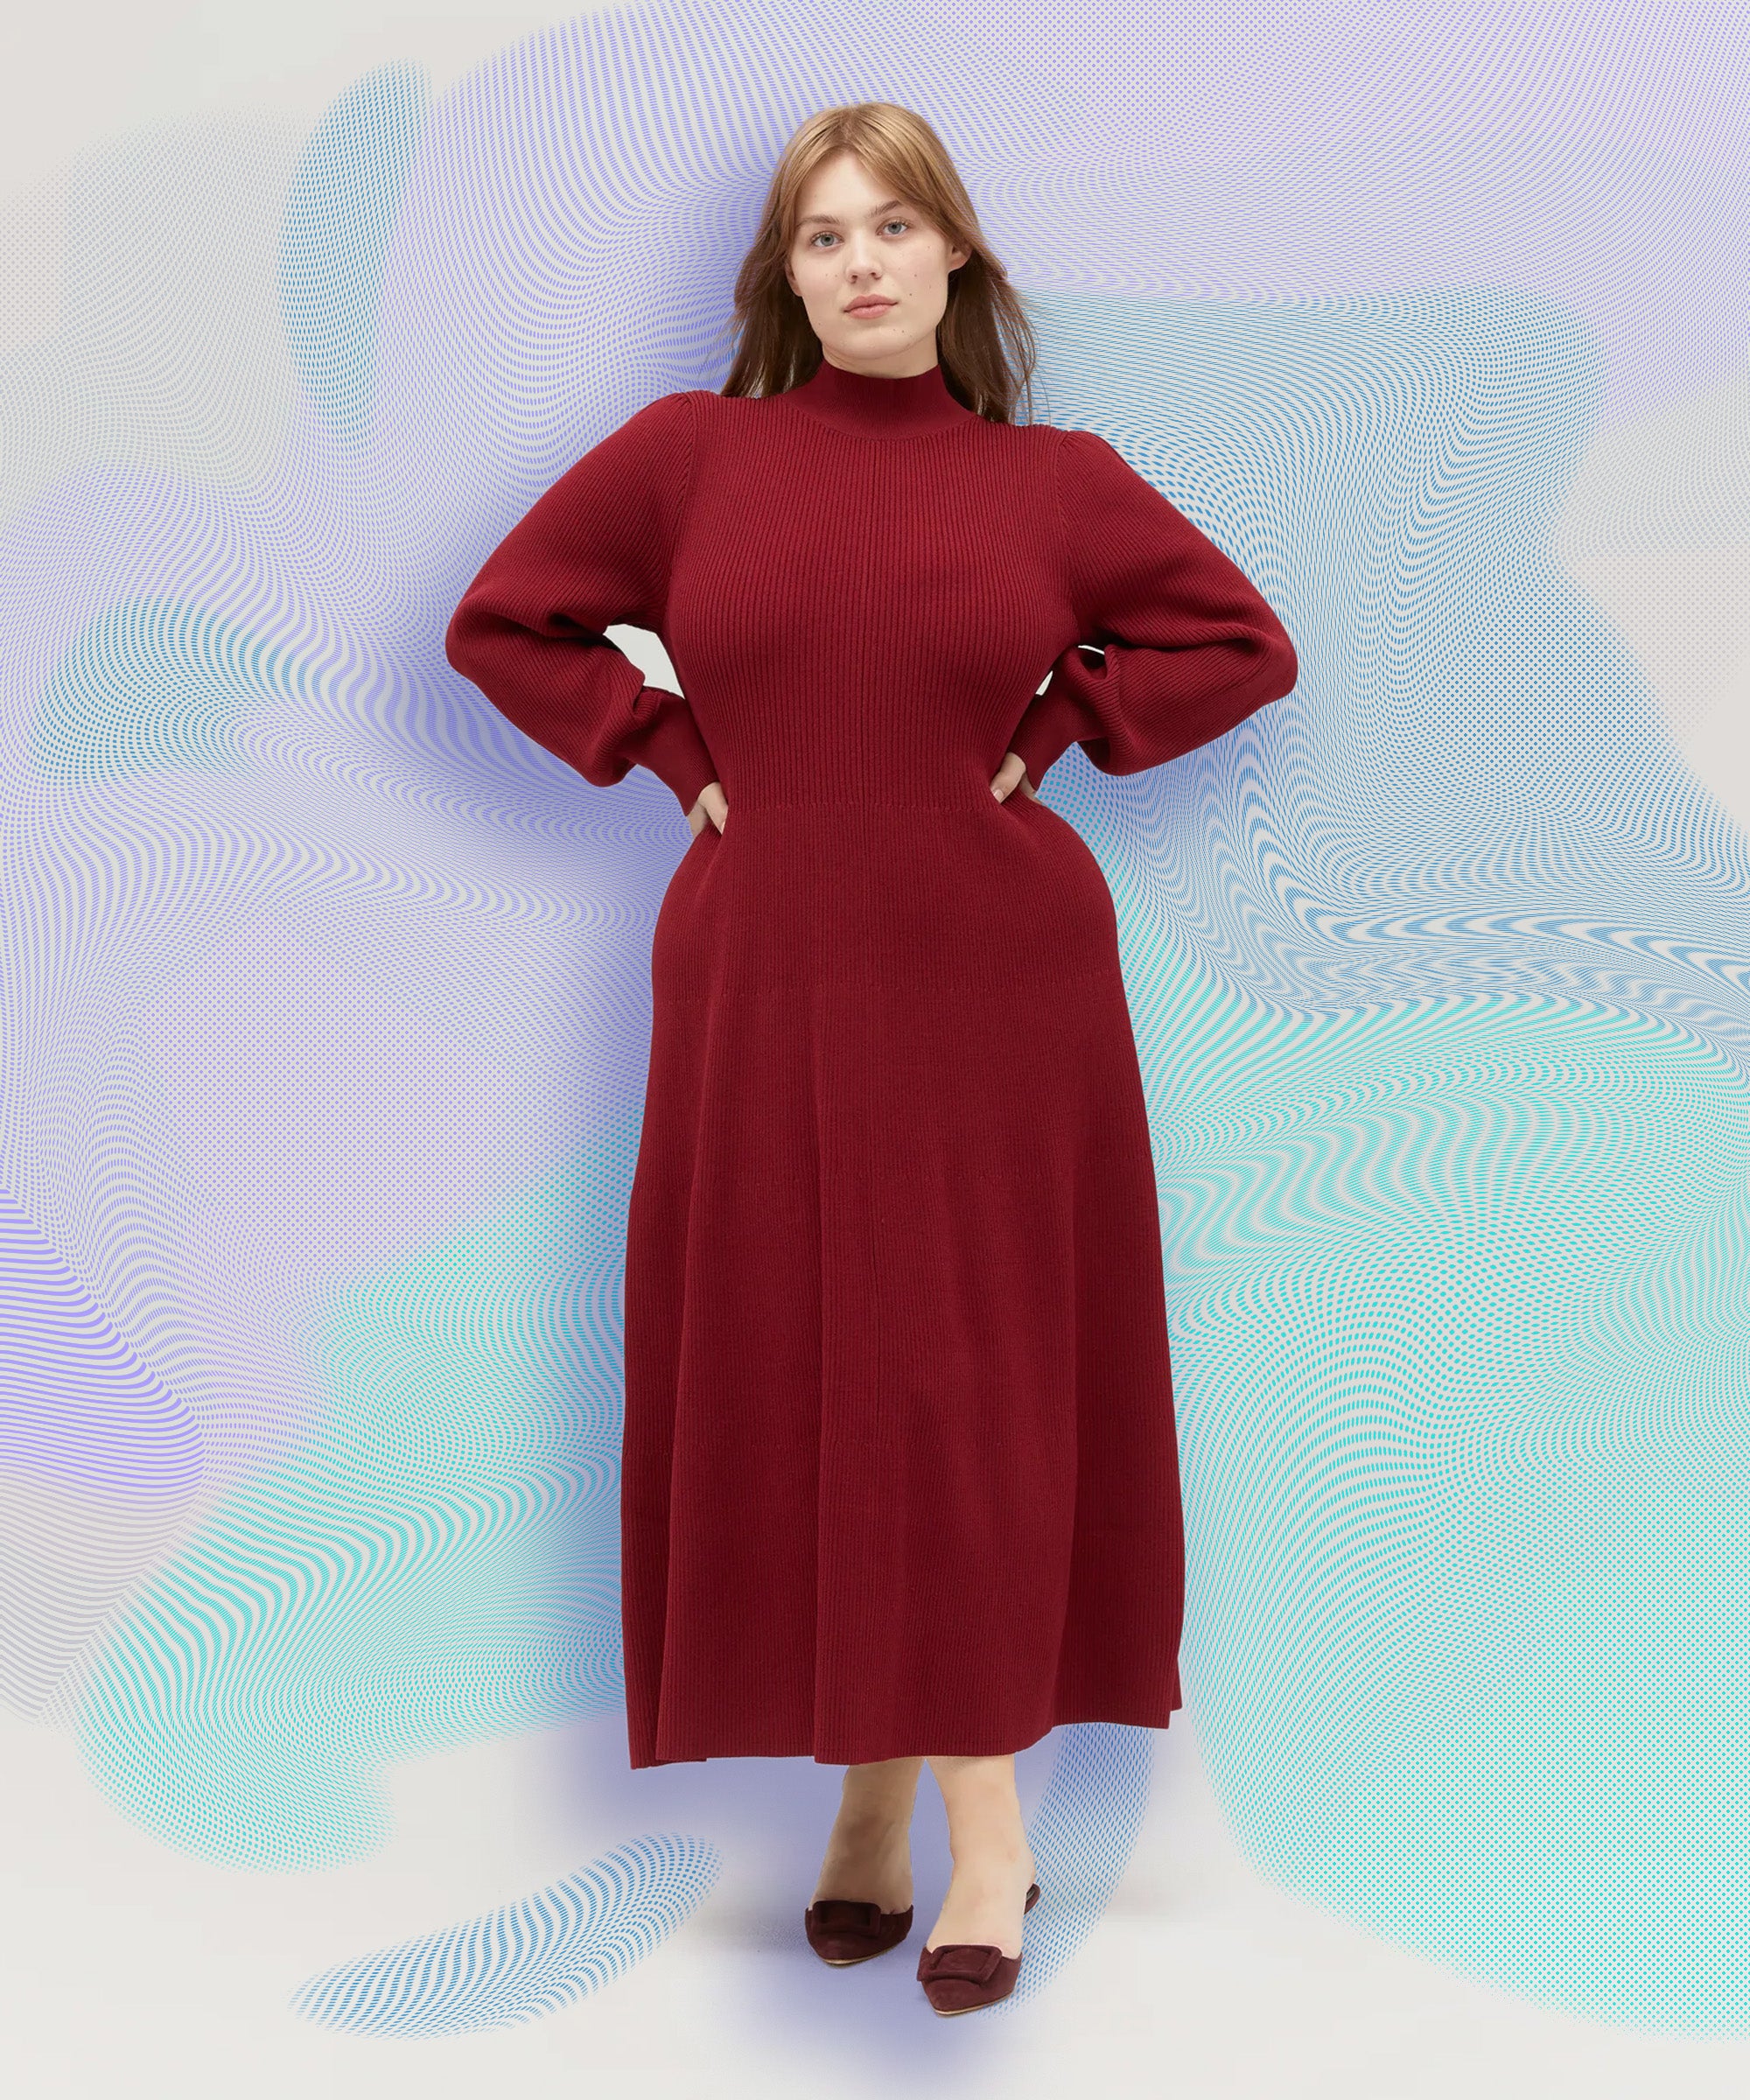 Warm winter dresses to keep you cozy and stylish in the coldest